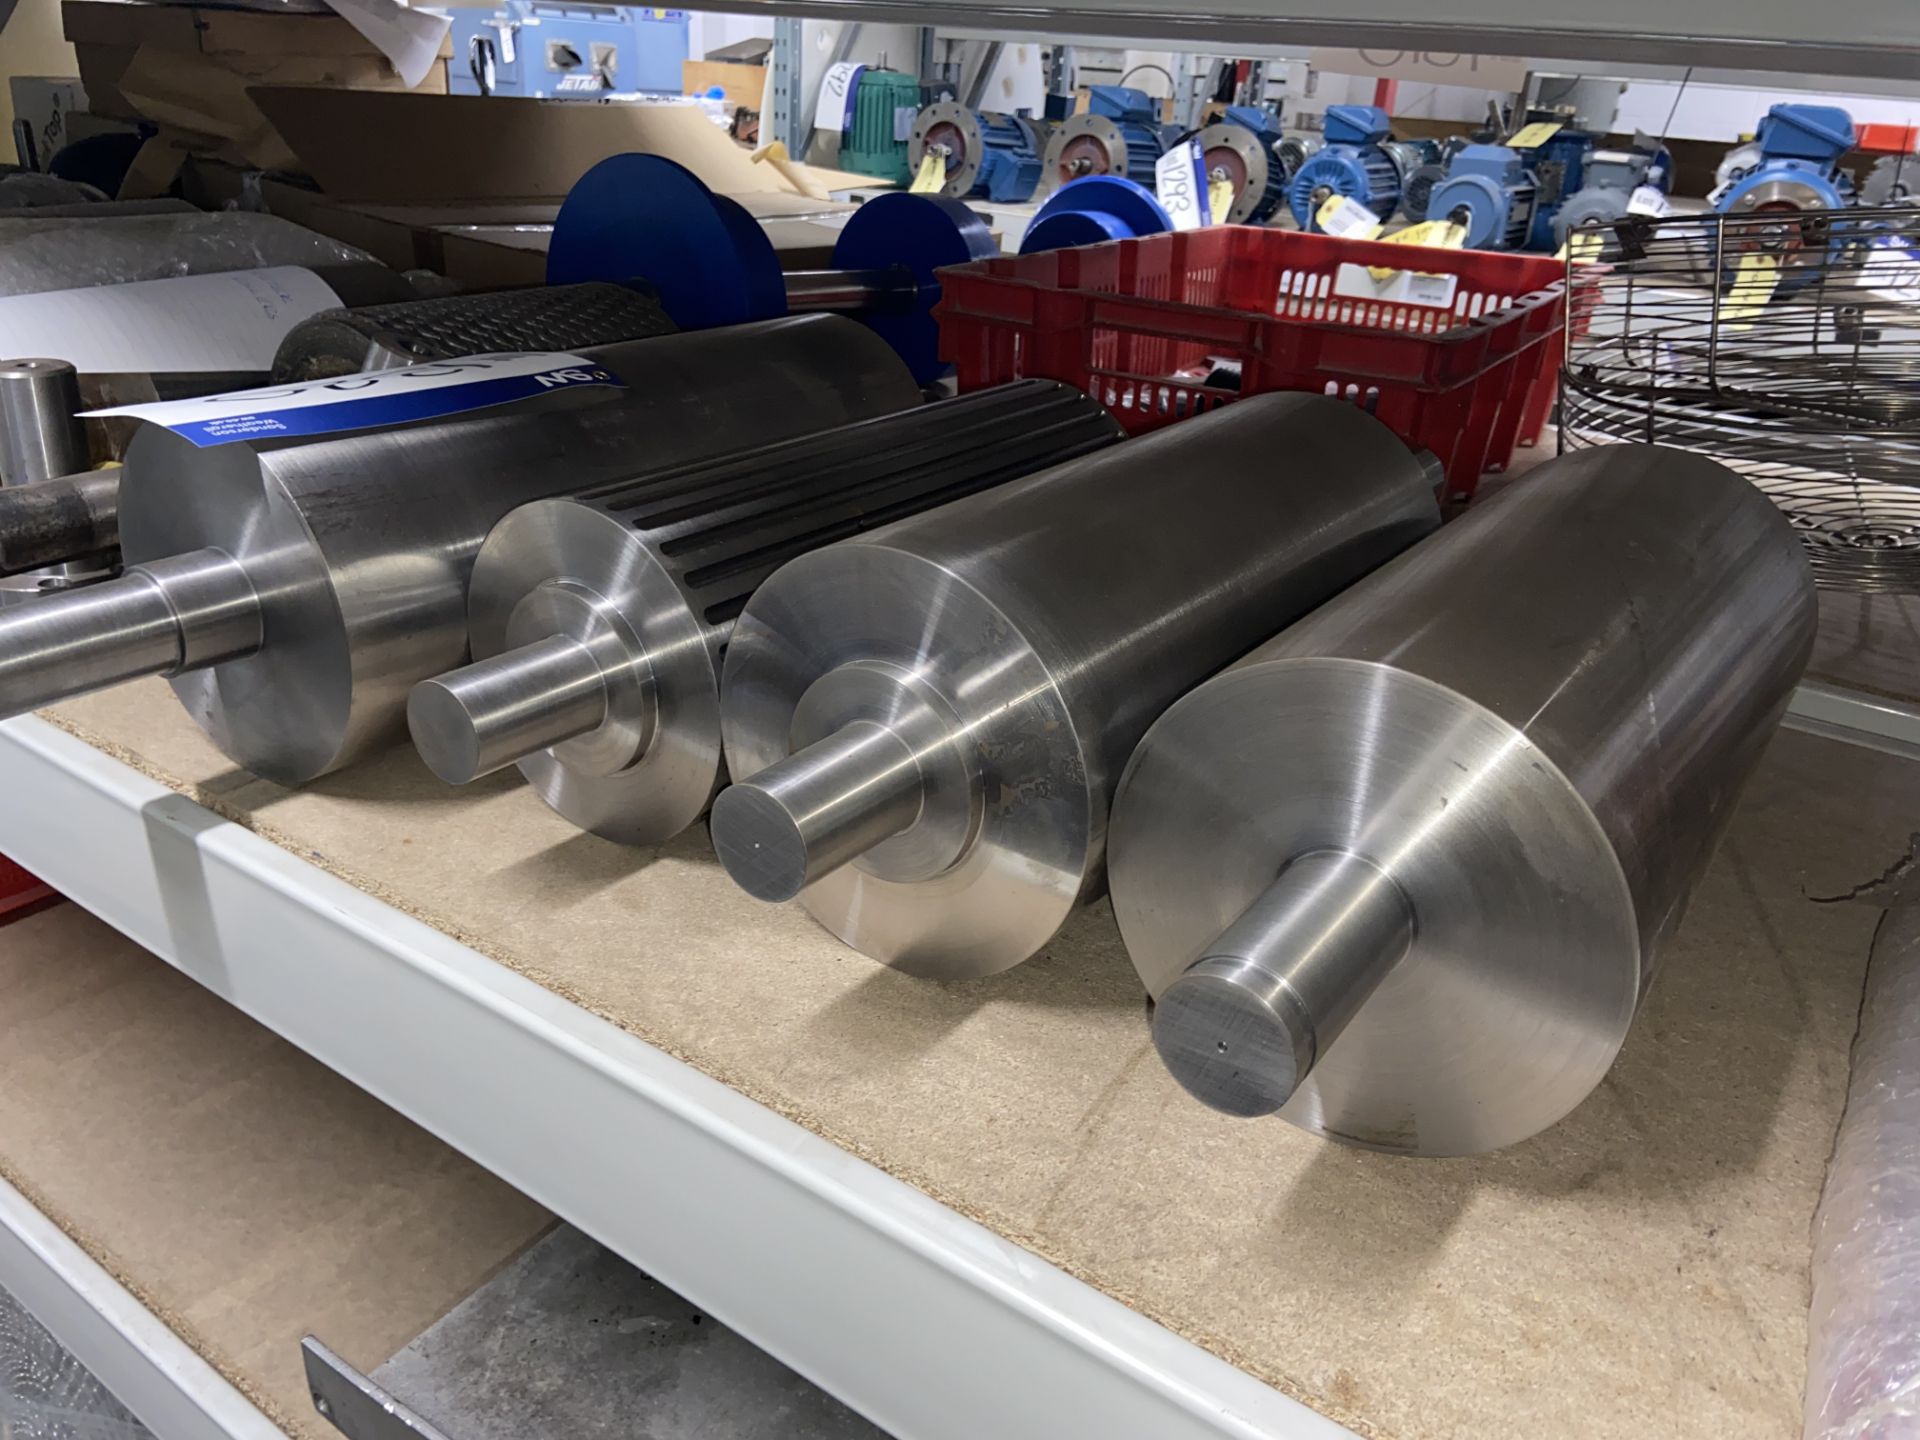 Assorted Stainless Steel Sheeter Rollers, as set out in one sectionPlease read the following